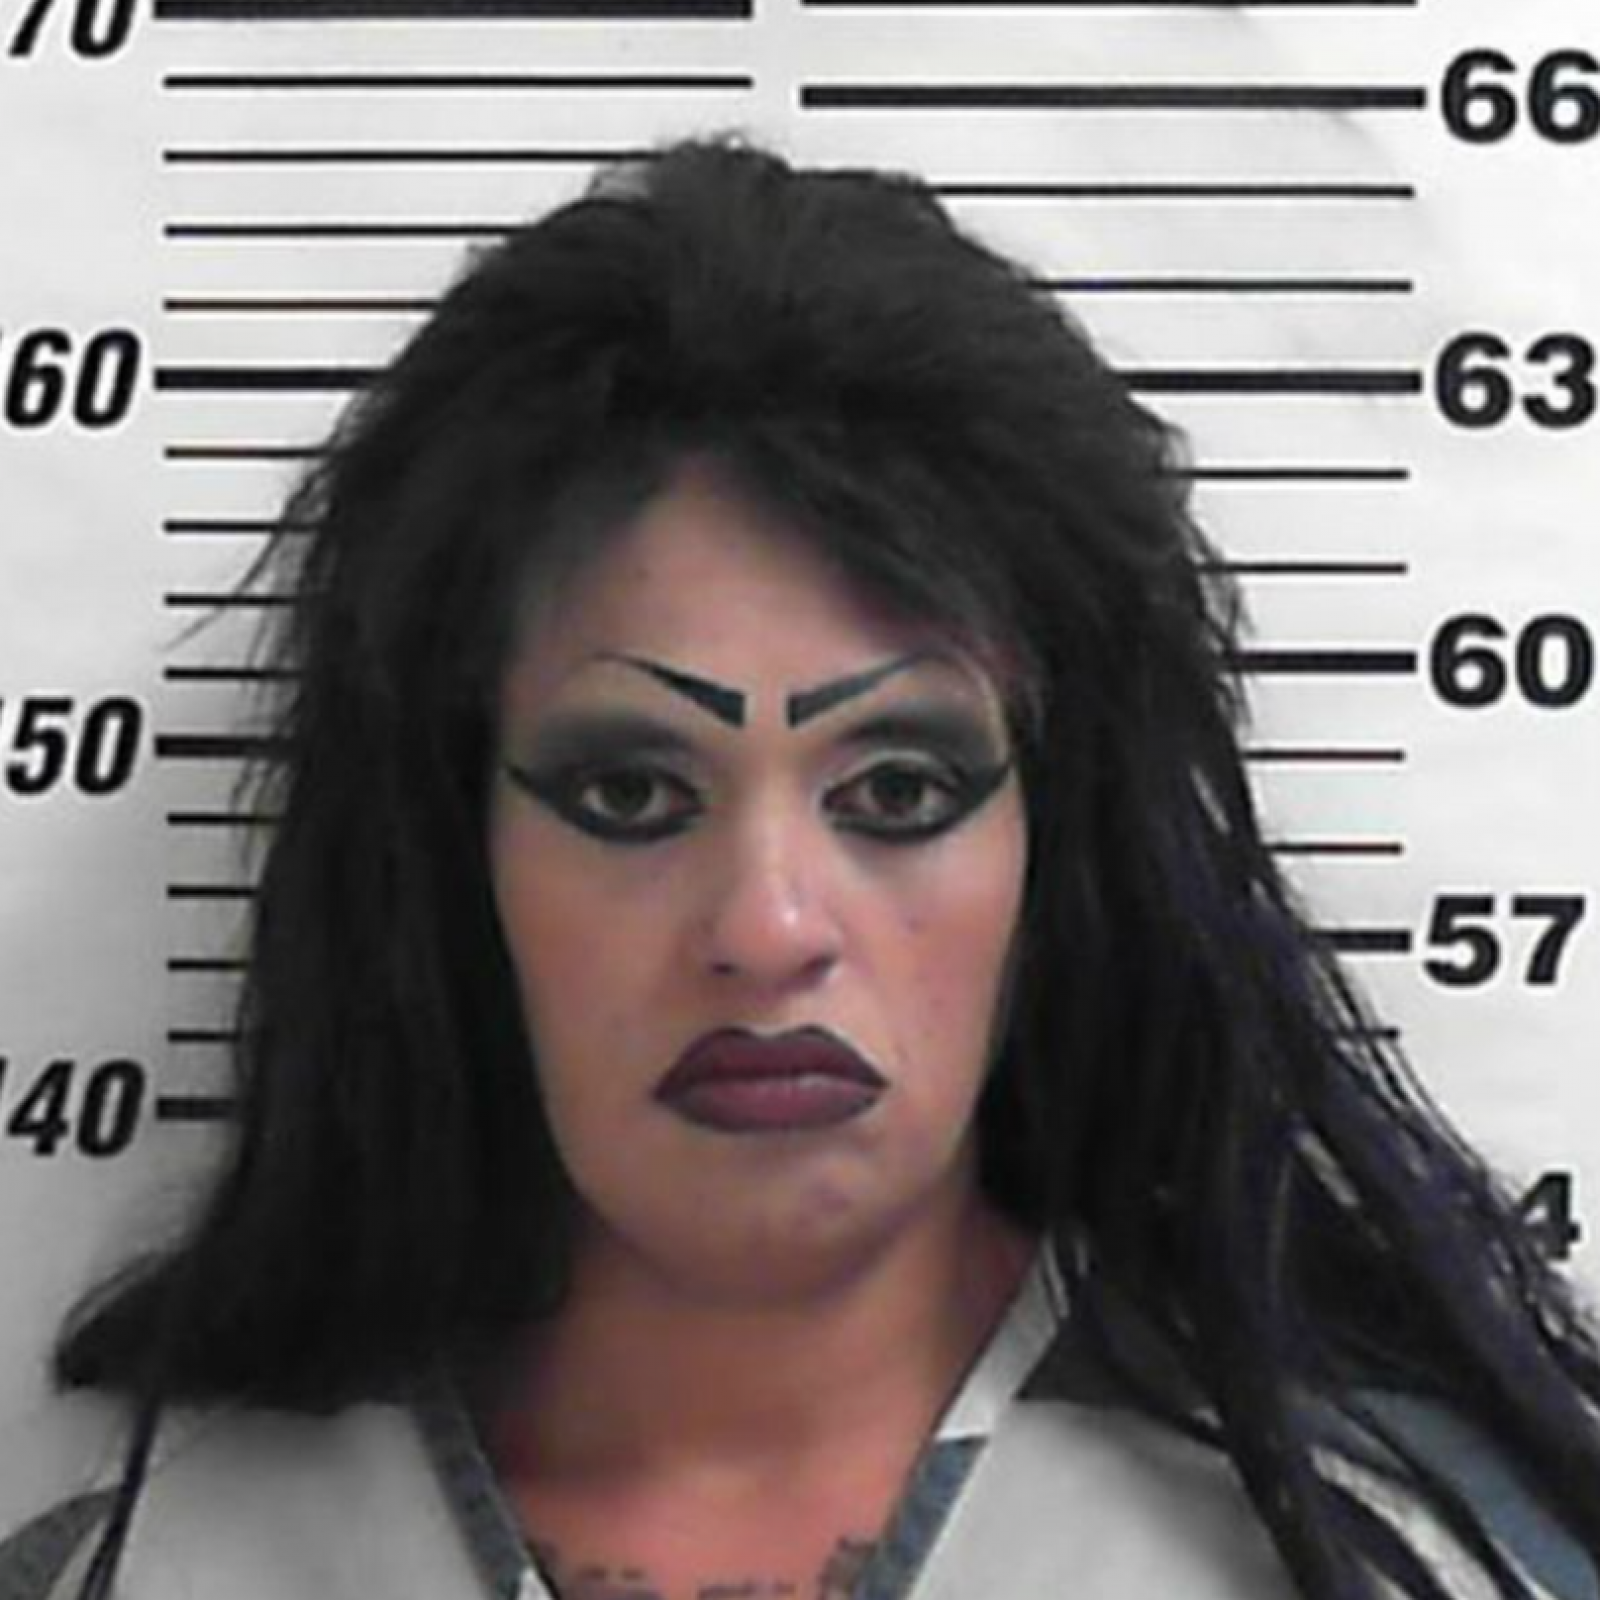 Utah Woman Found With Meth Tries To ID Herself As Daughter.